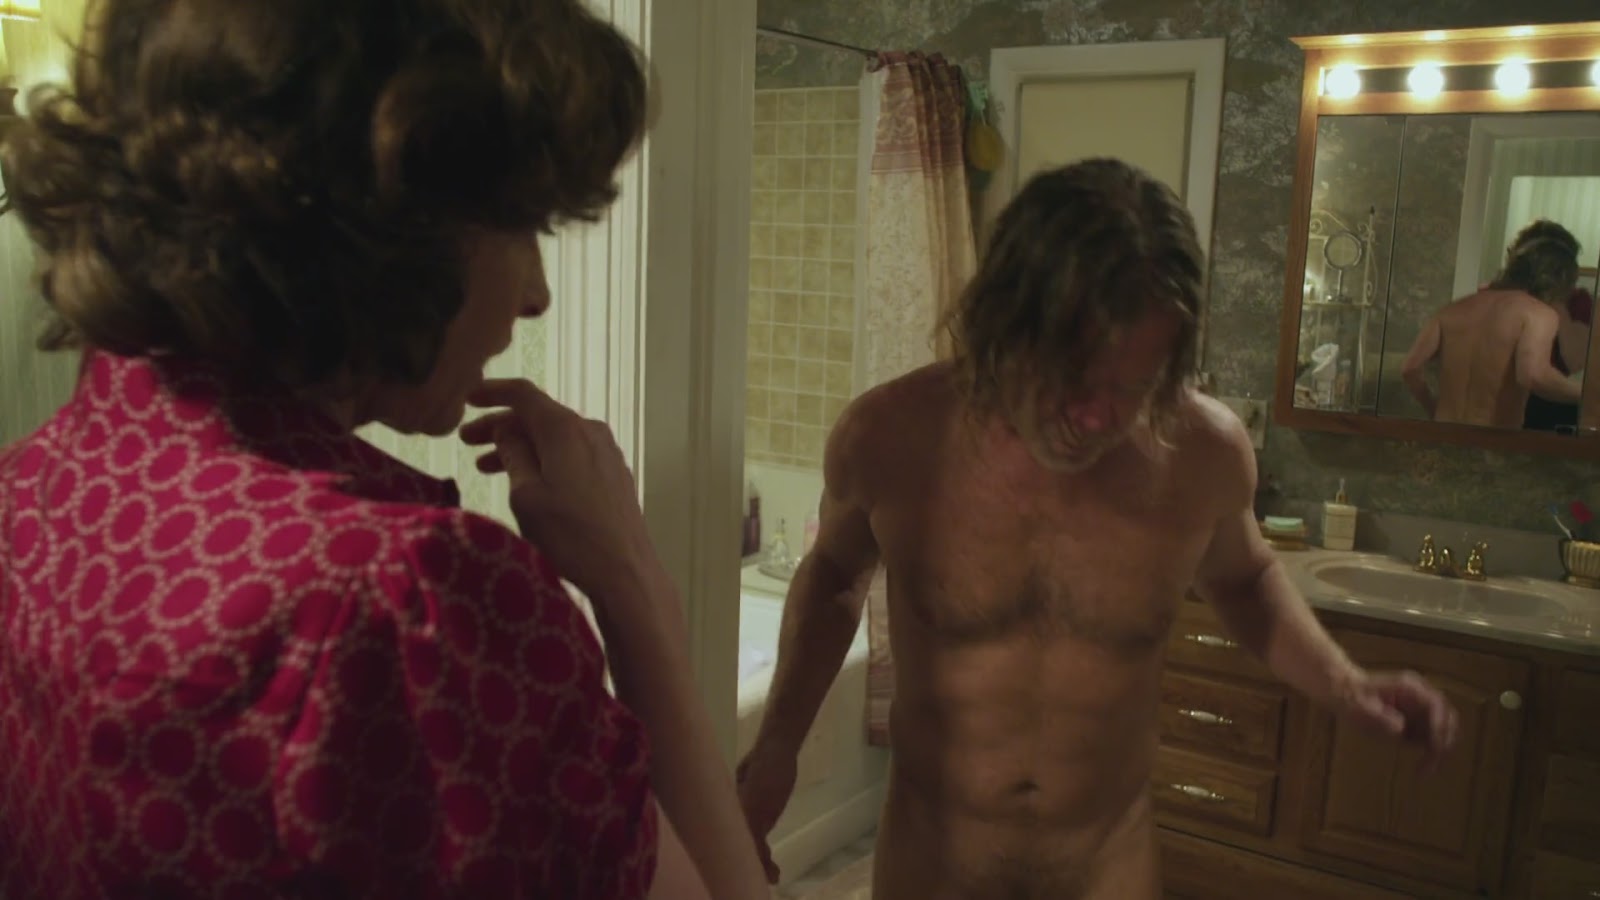 William H. Macy nude in Shameless 1-02 "Frank The Plank". ausCAPS...